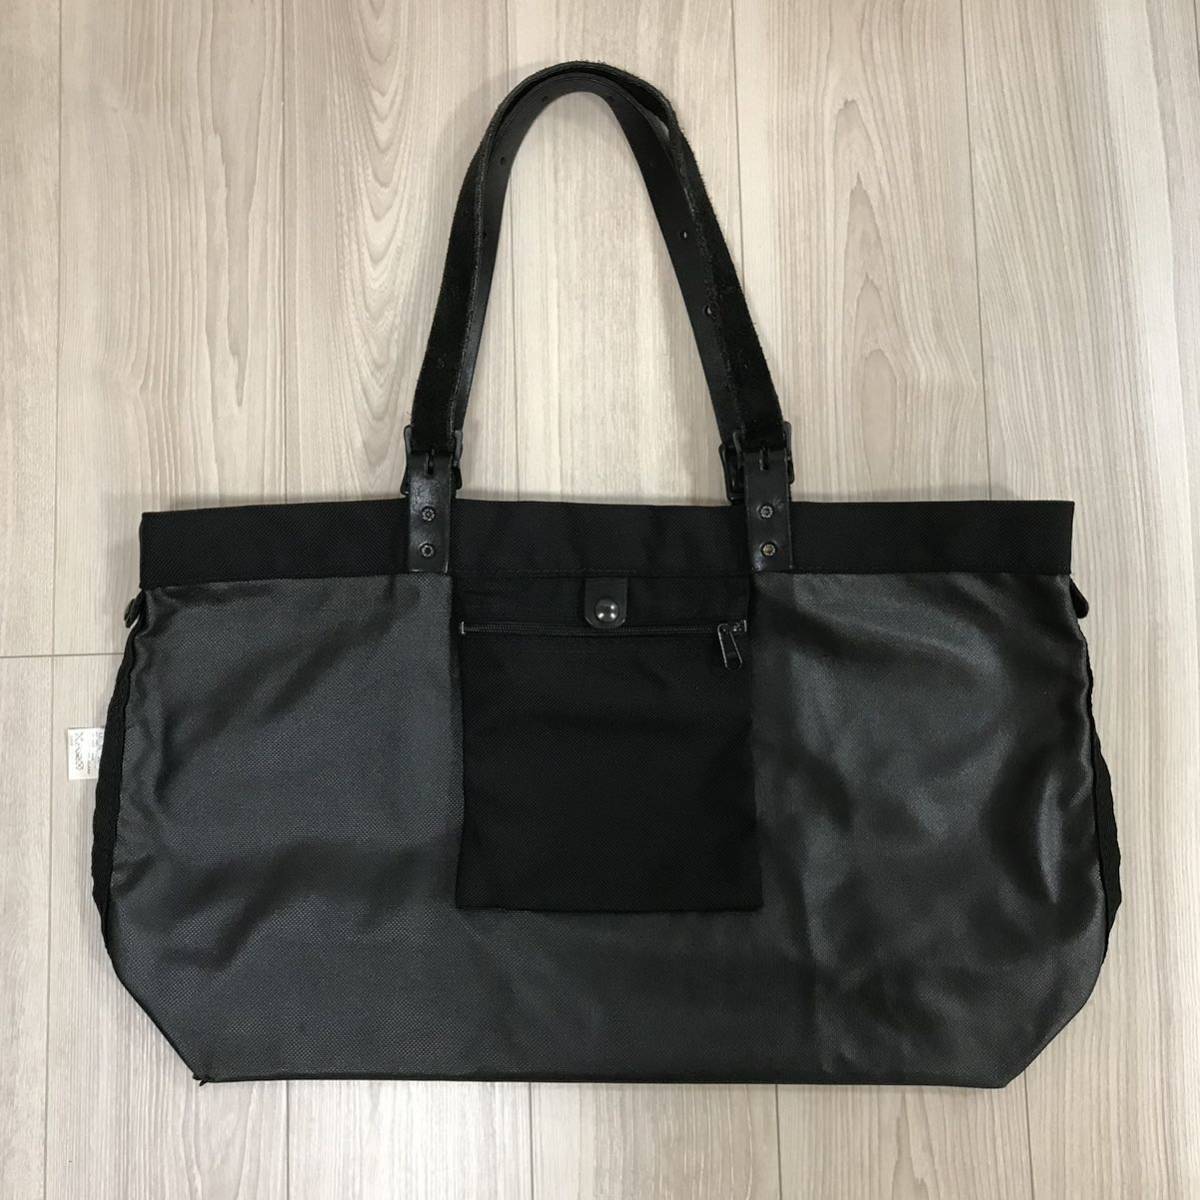 SOUTH2 WEST8 Canal Park Tote Bag made in USA サウス2ウエスト8カナル パーク バリスティック ナイロン レザー ショルダー トート バッグ_画像5